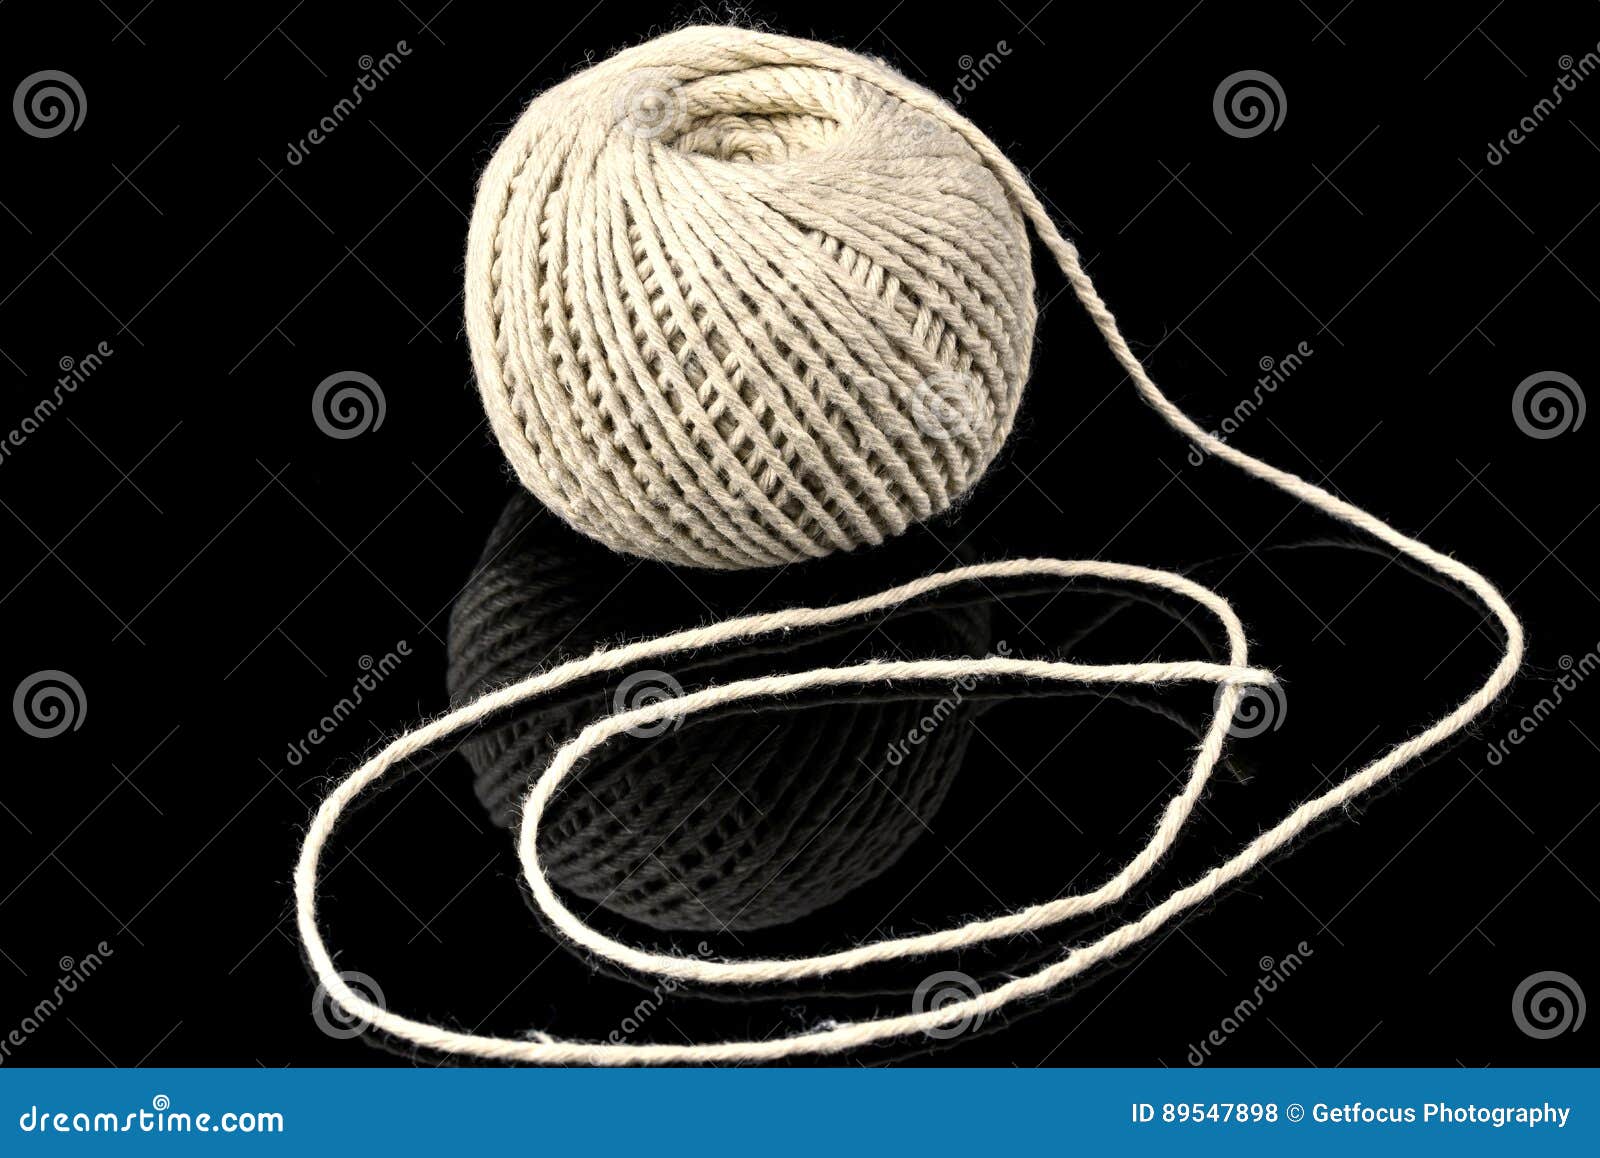 https://thumbs.dreamstime.com/z/roll-thick-string-curved-black-background-89547898.jpg